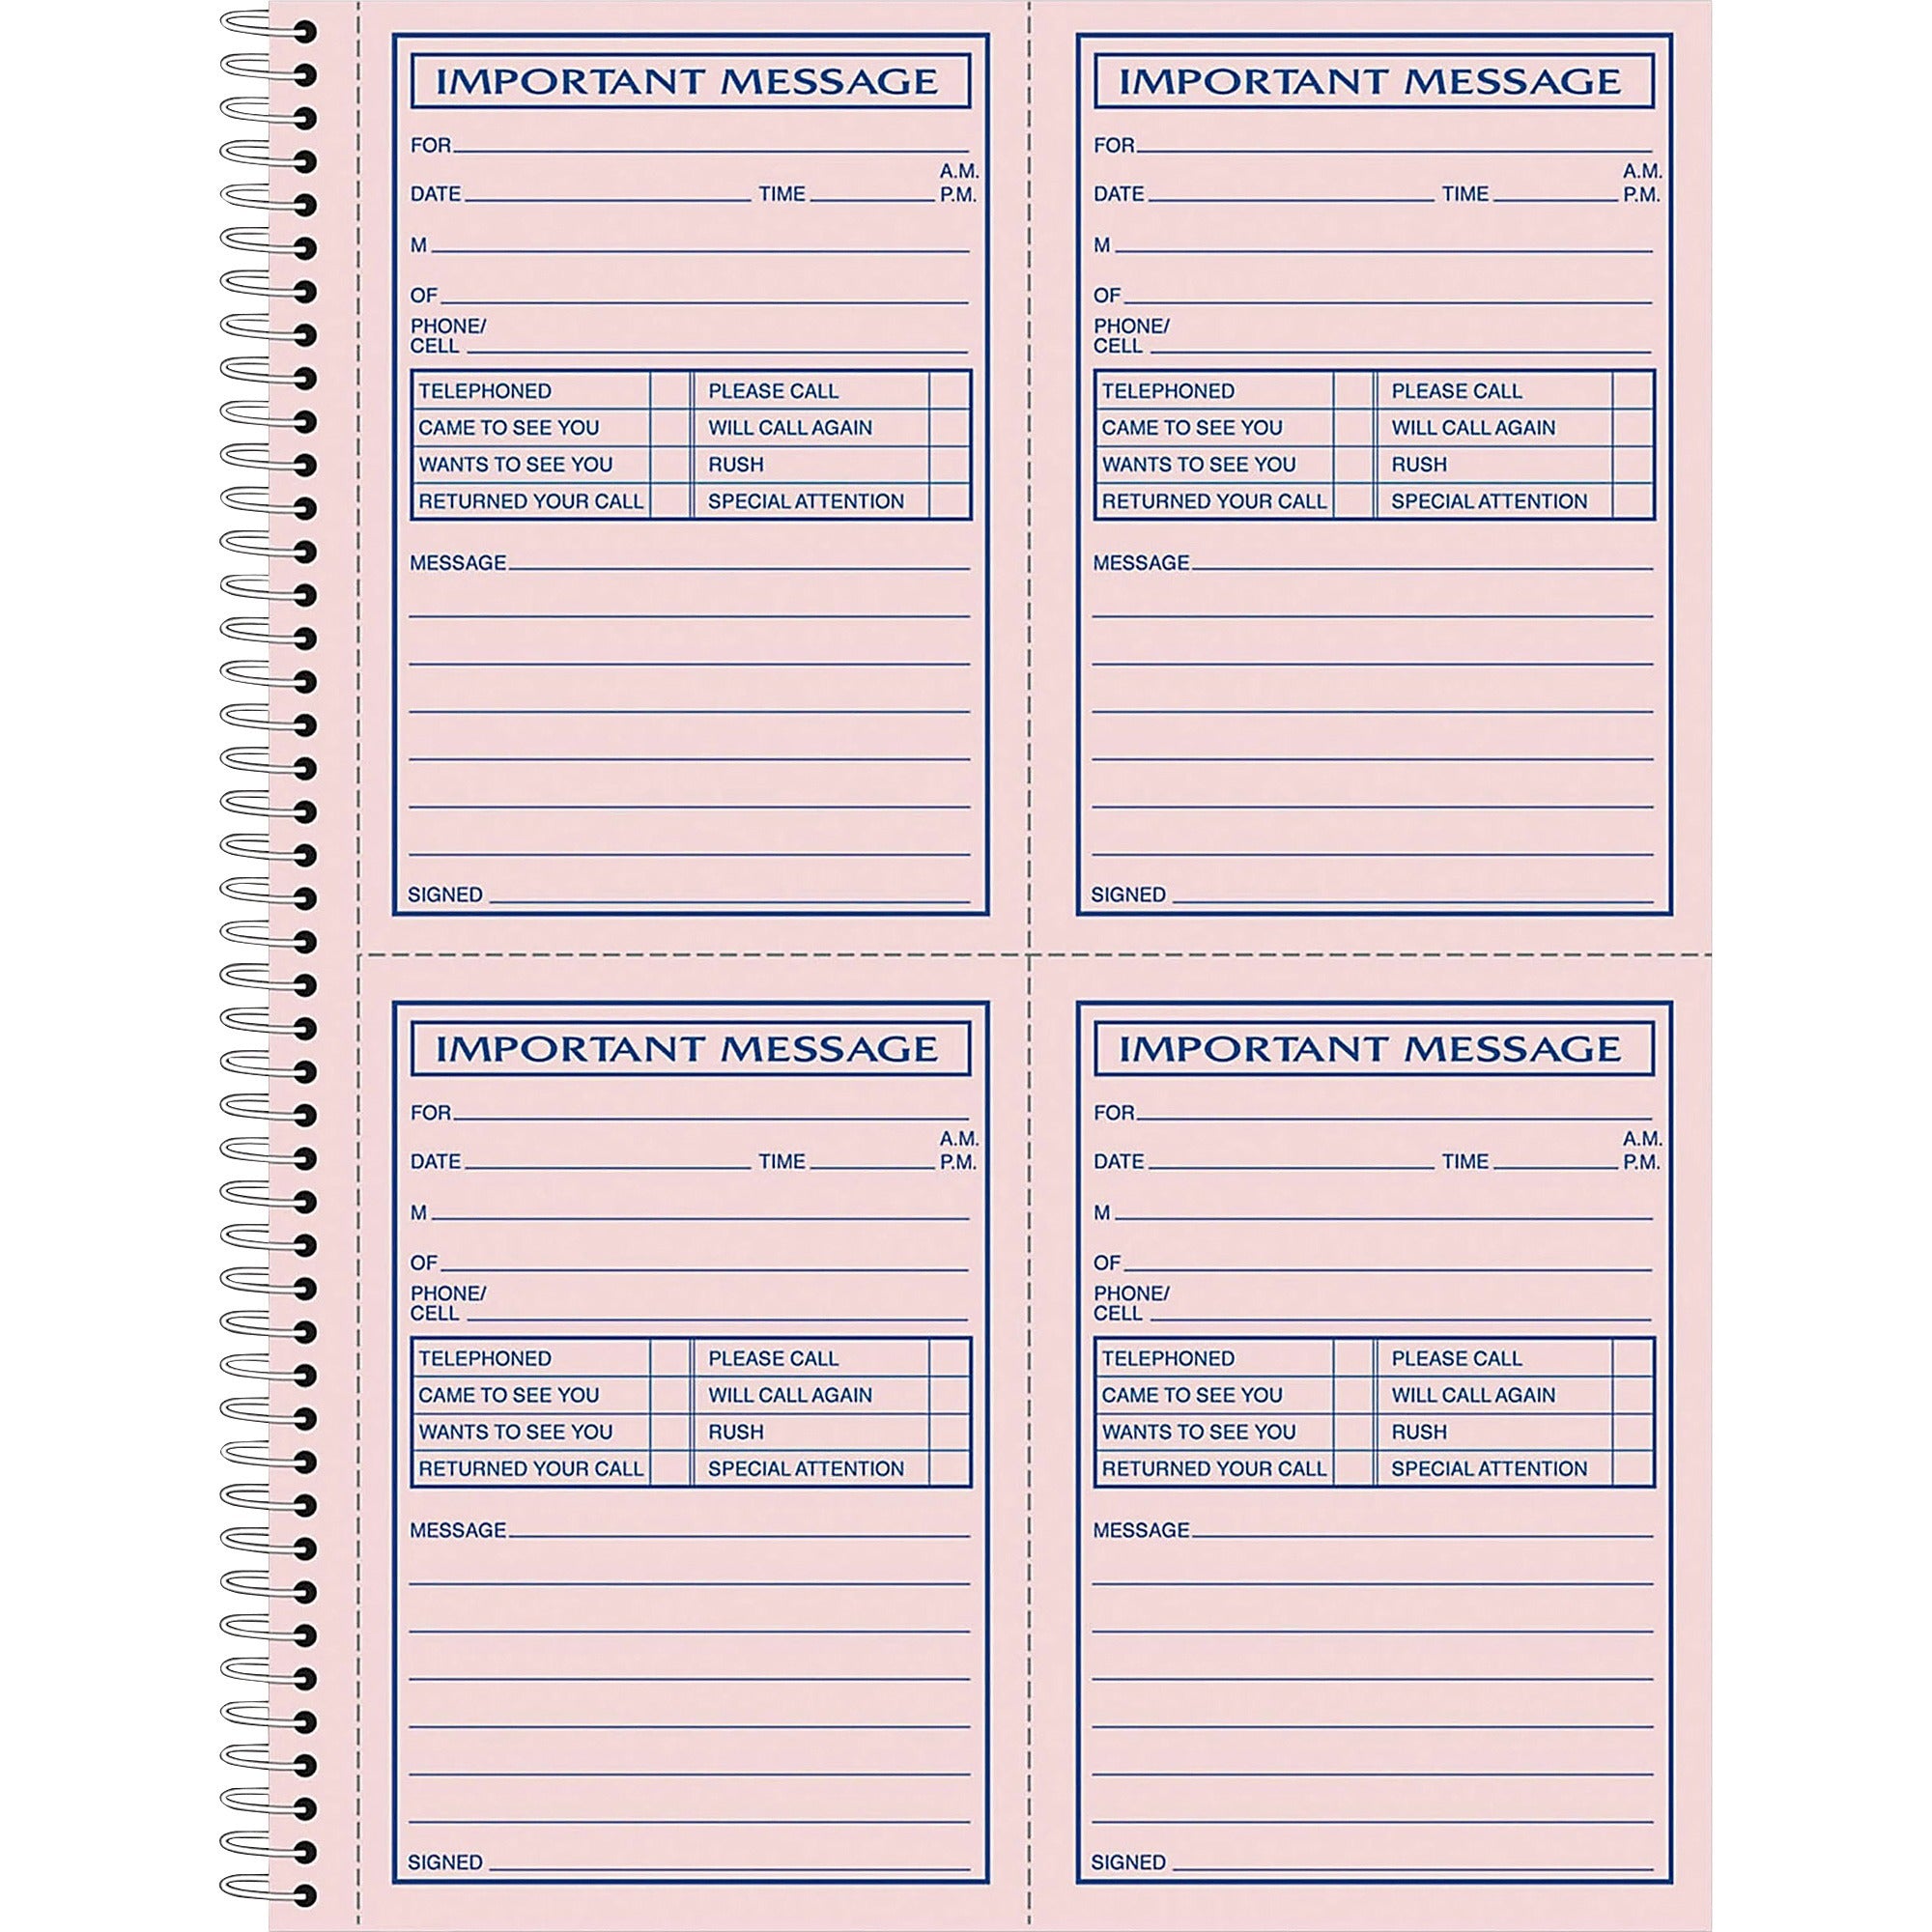 Adams Carbonless Important Message Pad - 200 Sheet(s) - Spiral Bound - 2 PartCarbonless Copy - 8.50" x 11" Sheet Size - Assorted Sheet(s) - 1 Each - 